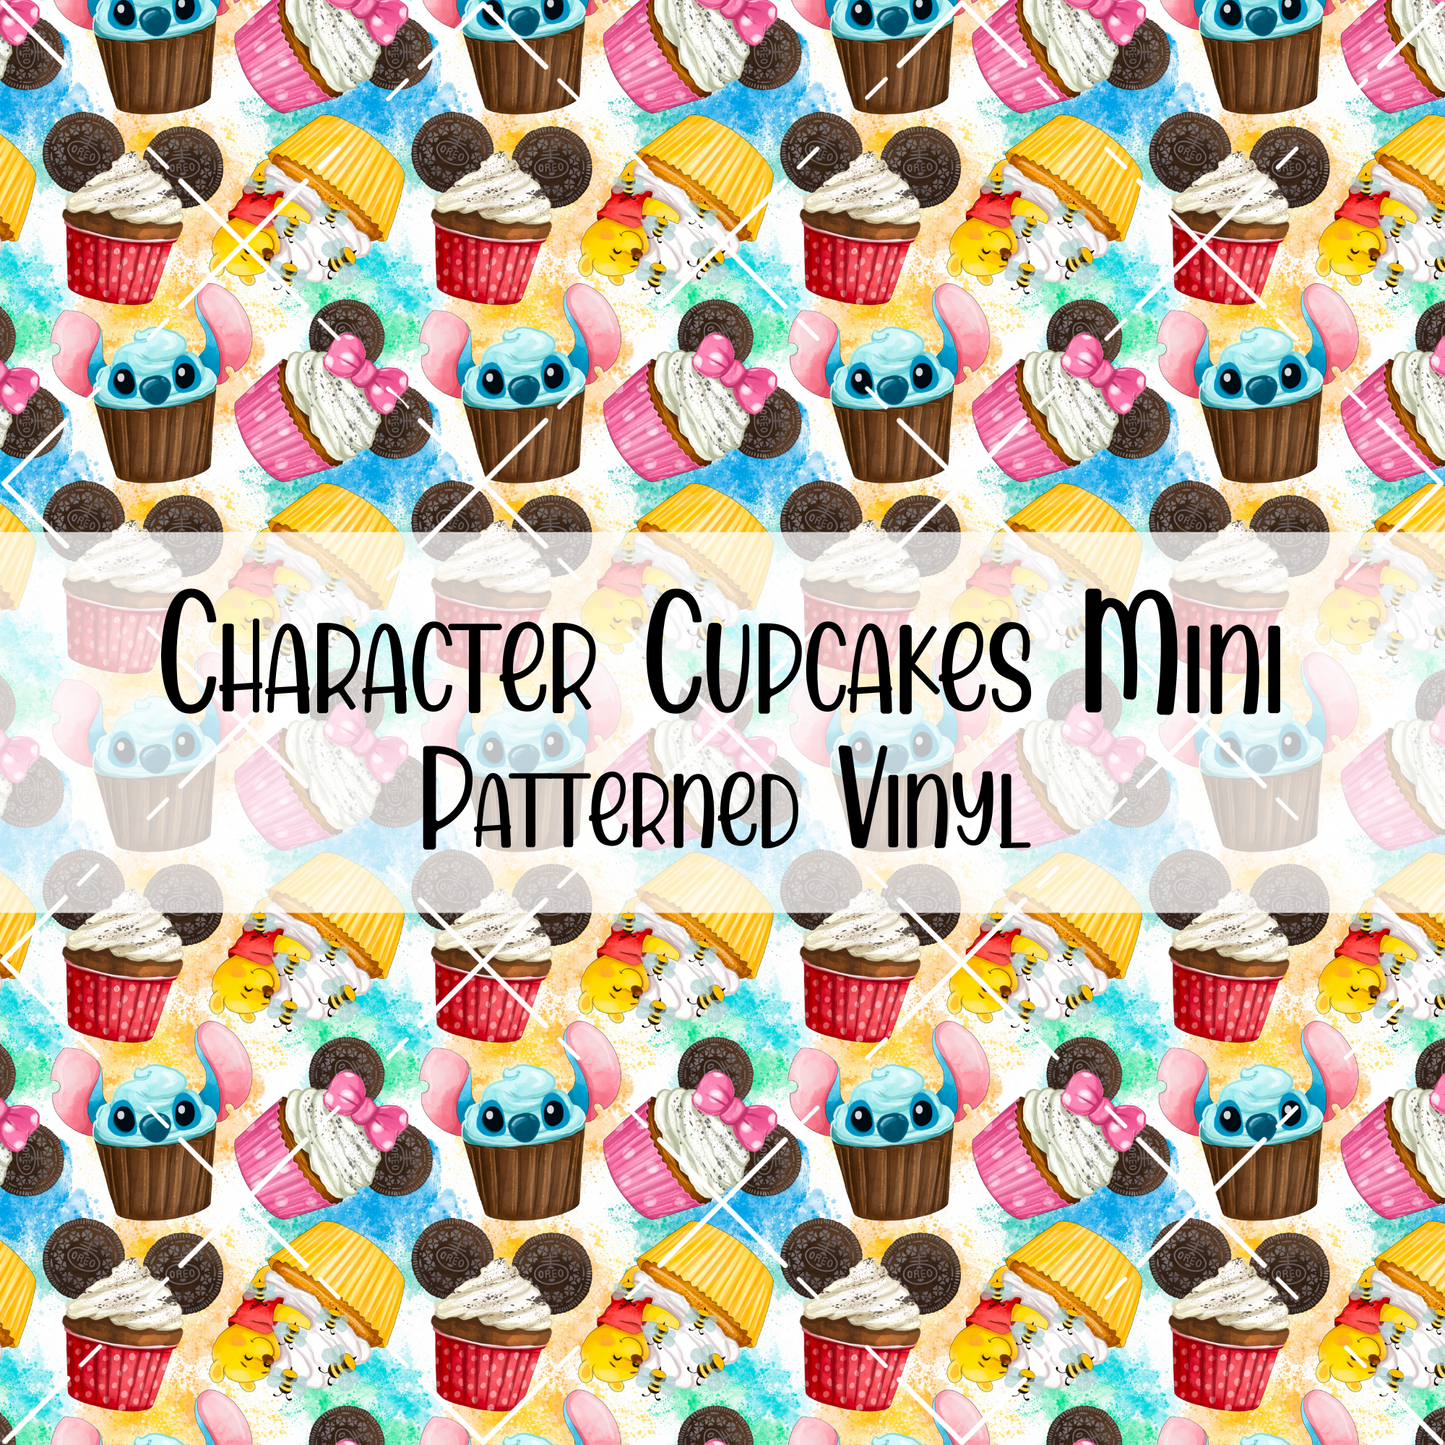 Character Cupcakes Patterned Vinyl